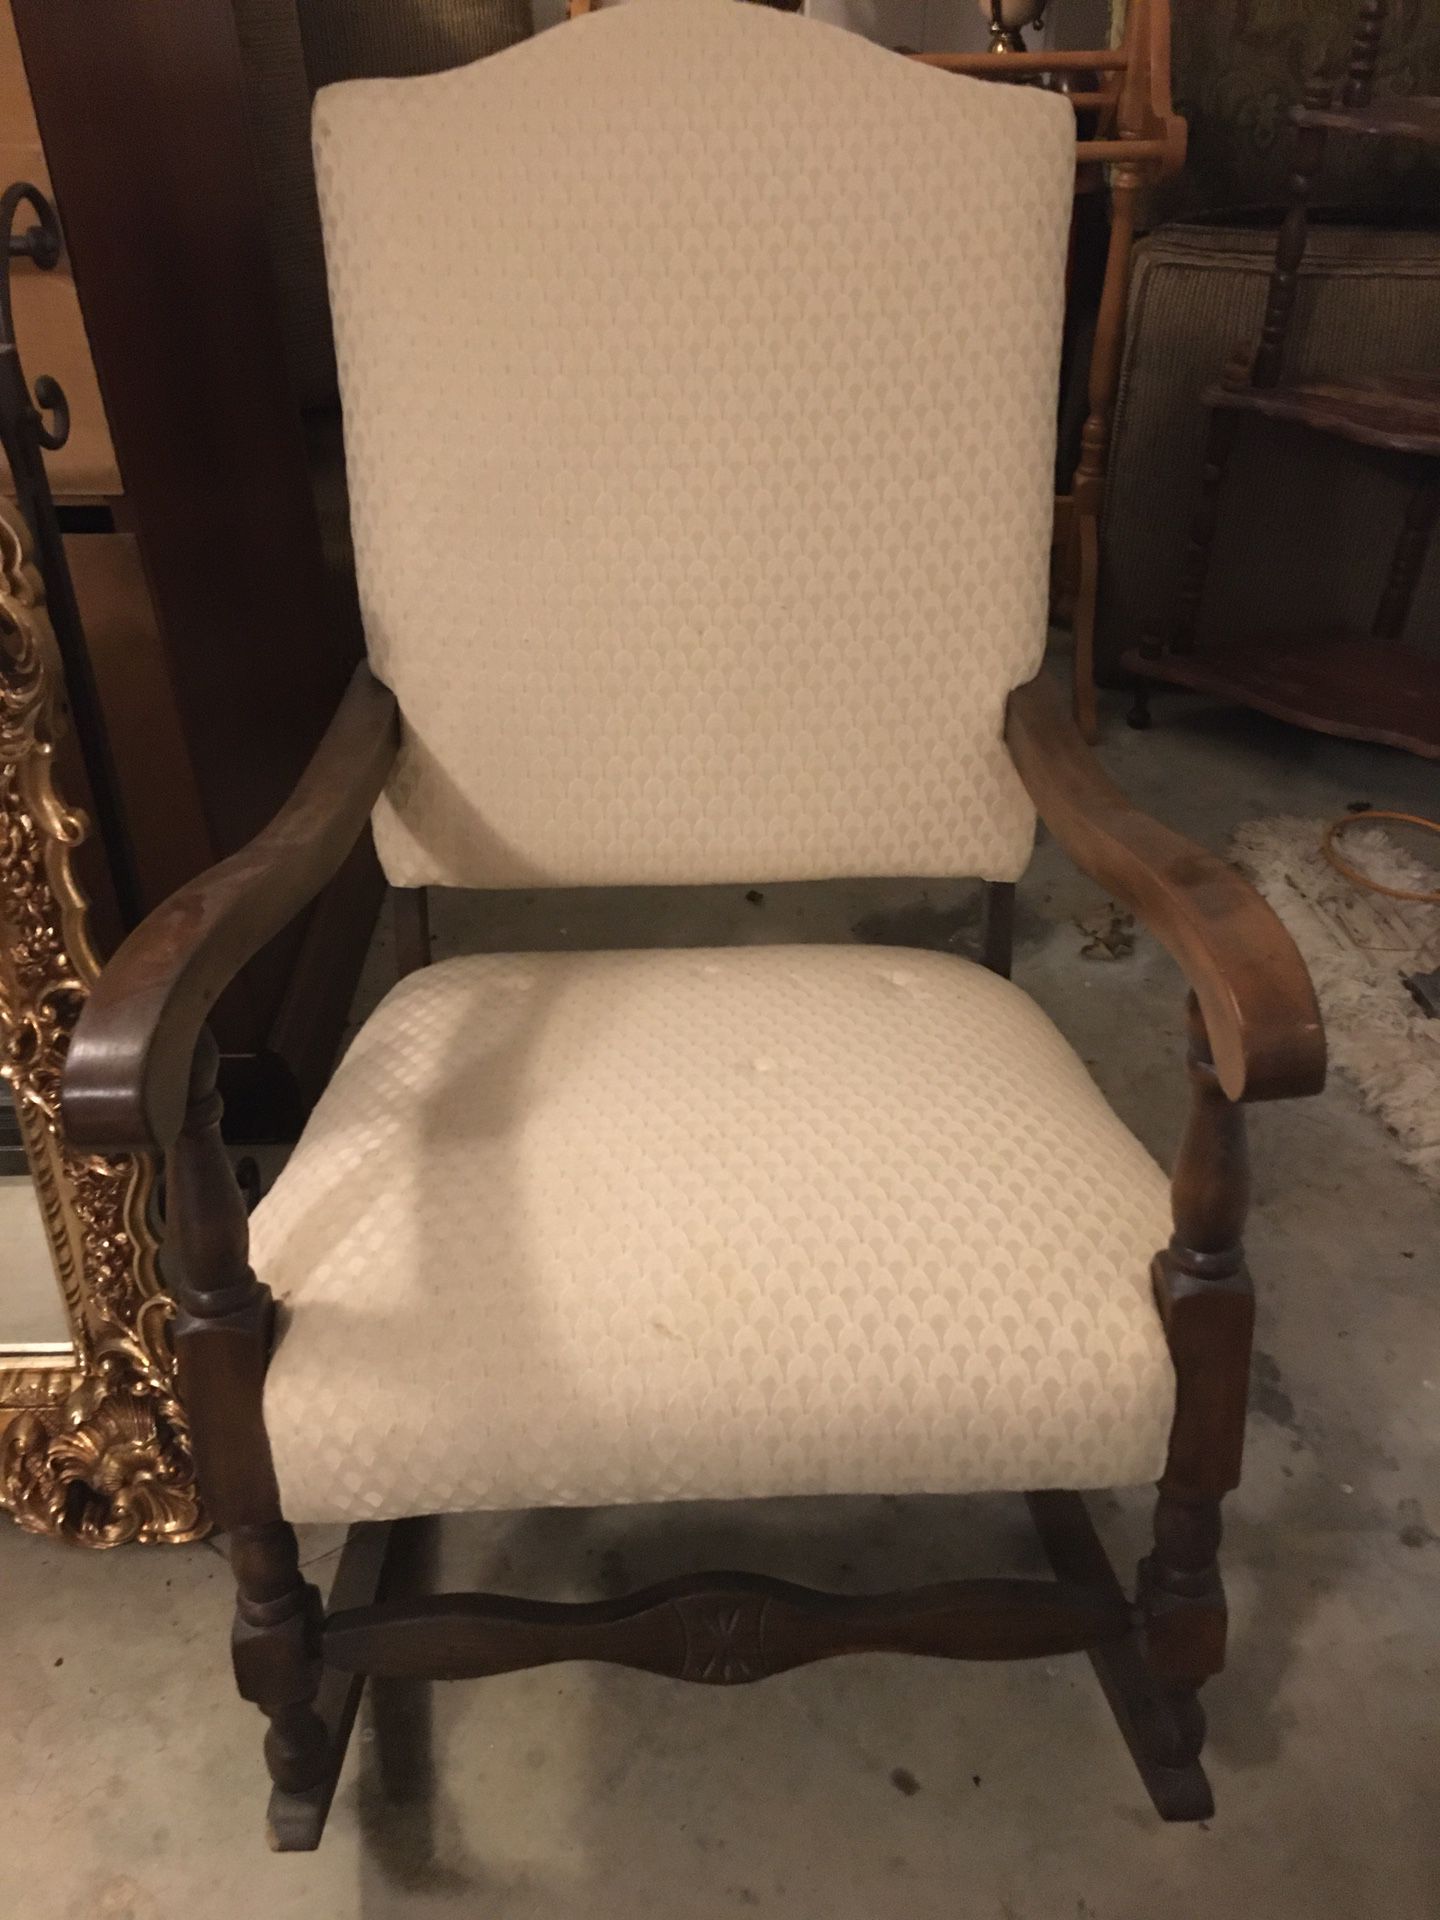 Rocking chair great condition newly refurbished